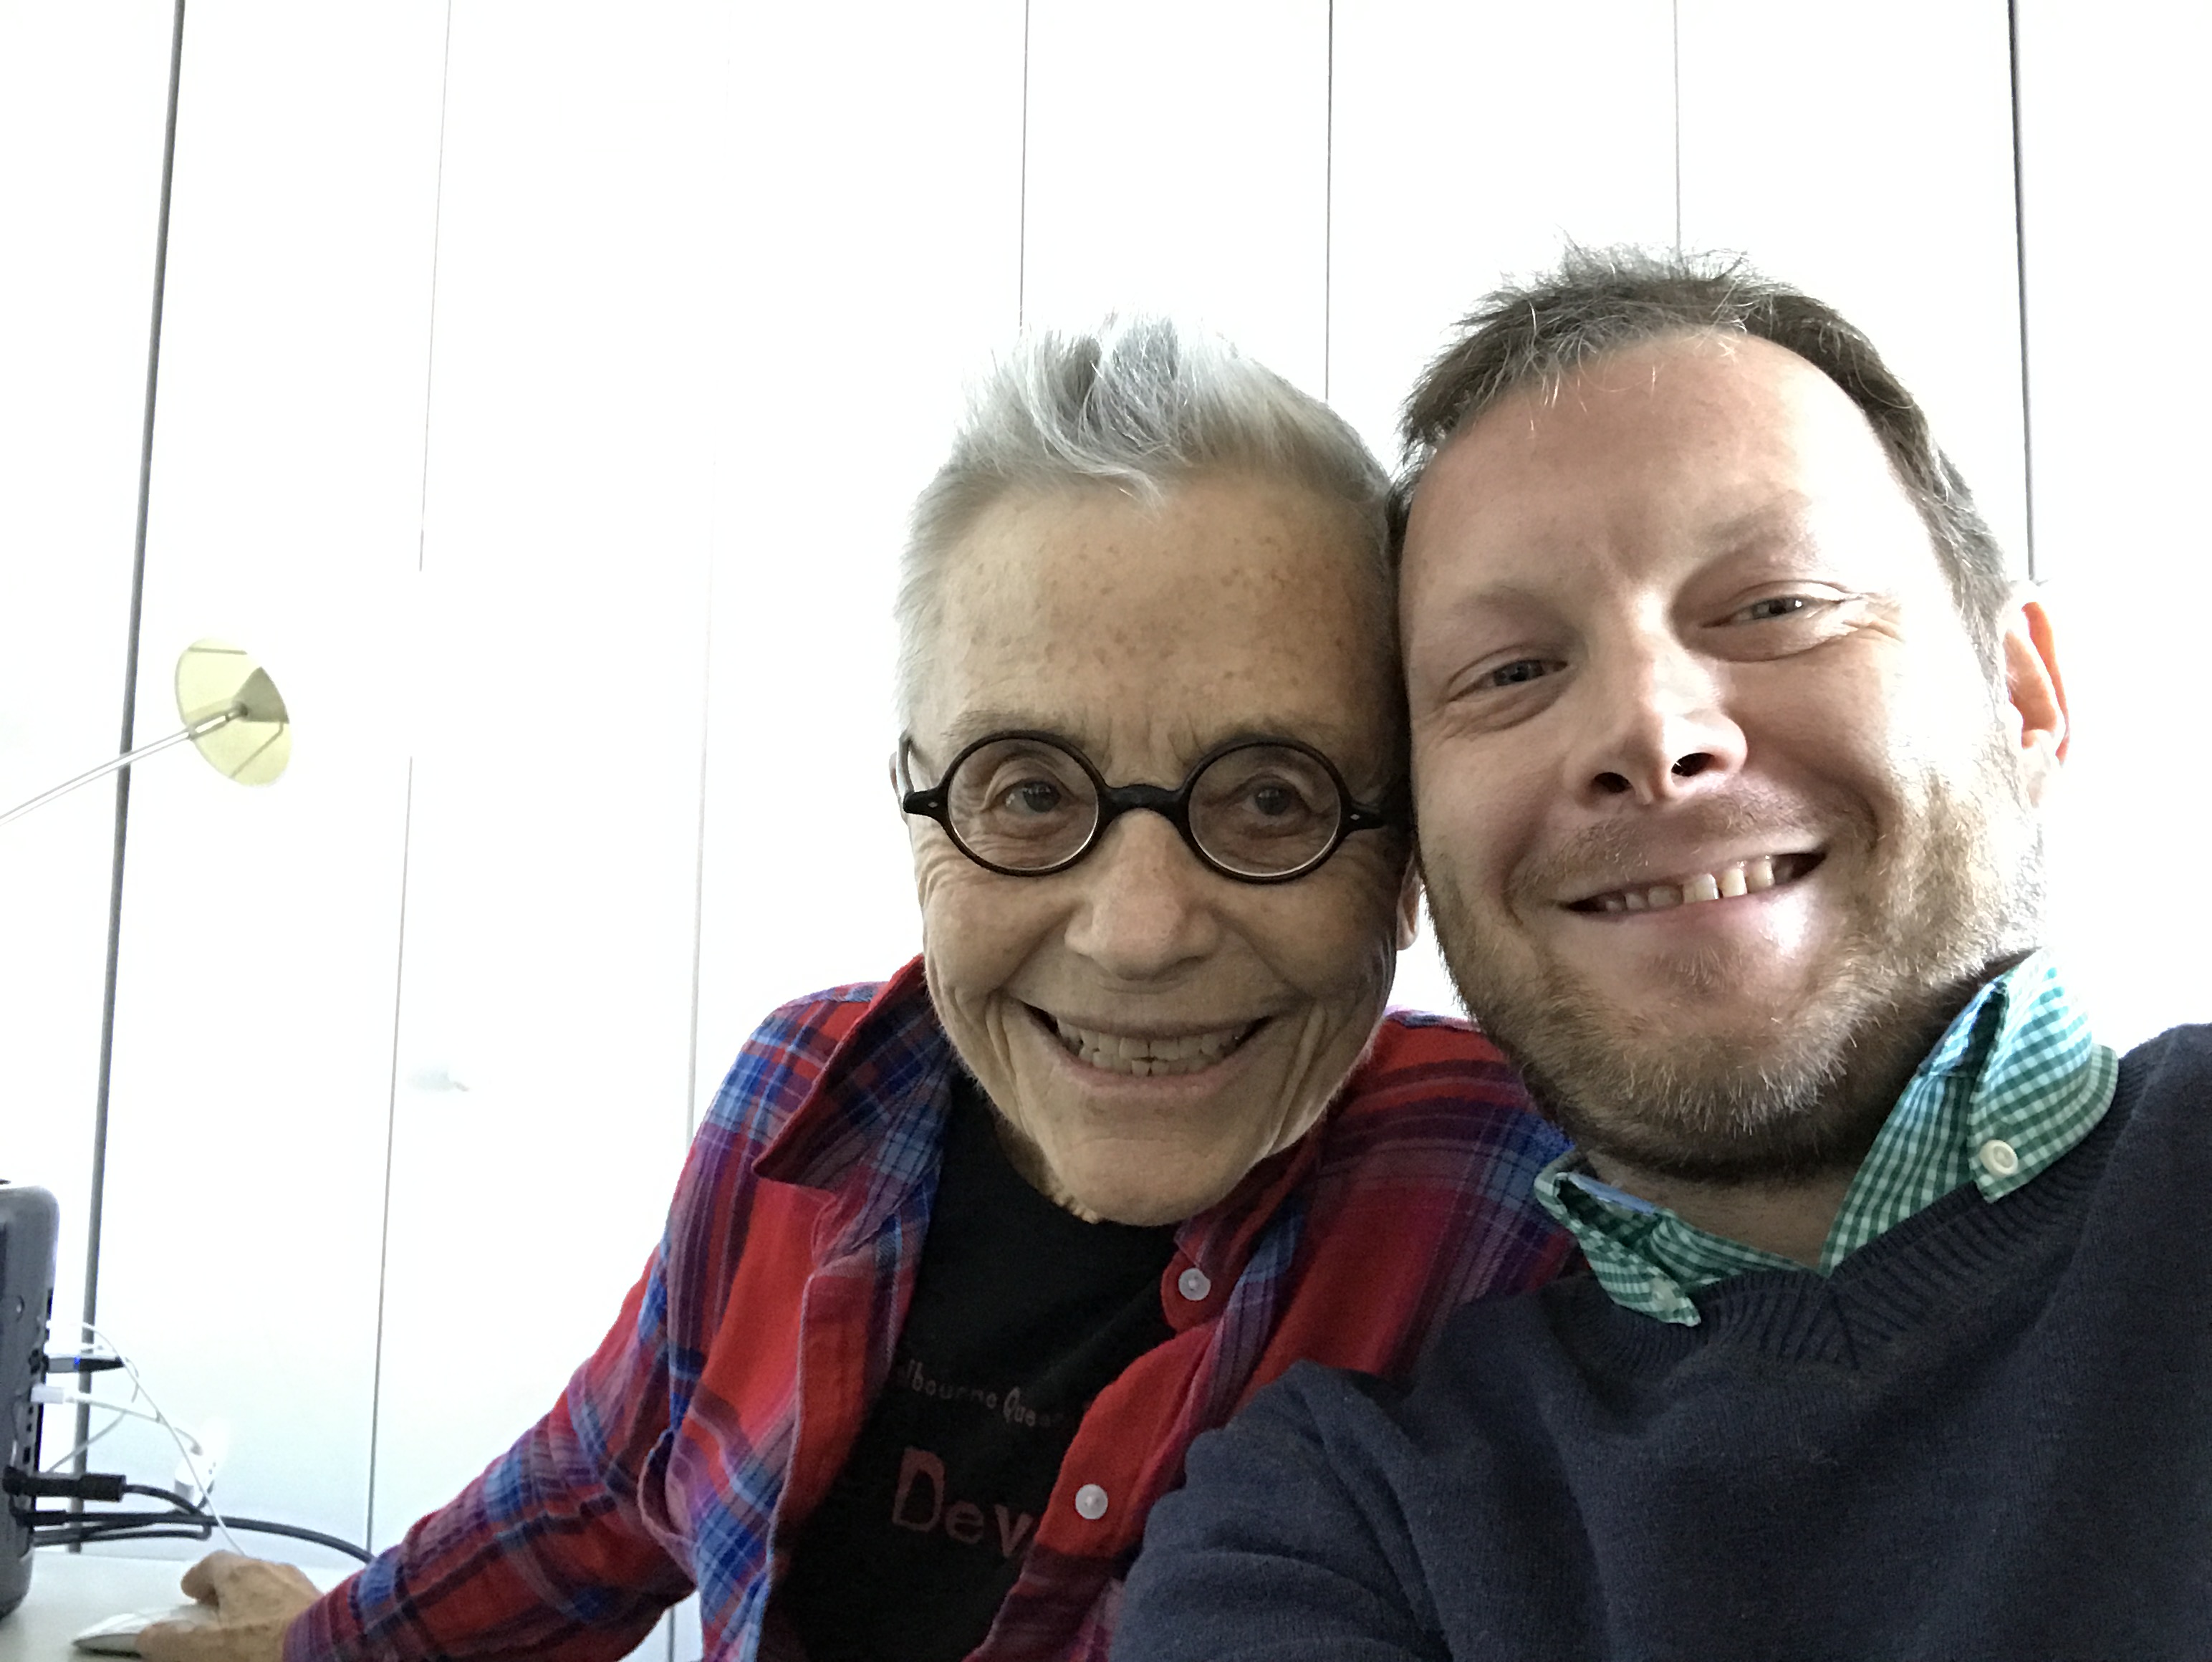 Experimental filmmaker Barbara Hammer with Wexner Center Film/Video Studio Editor Paul Hill on his visit to her NYC studio in fall 2017